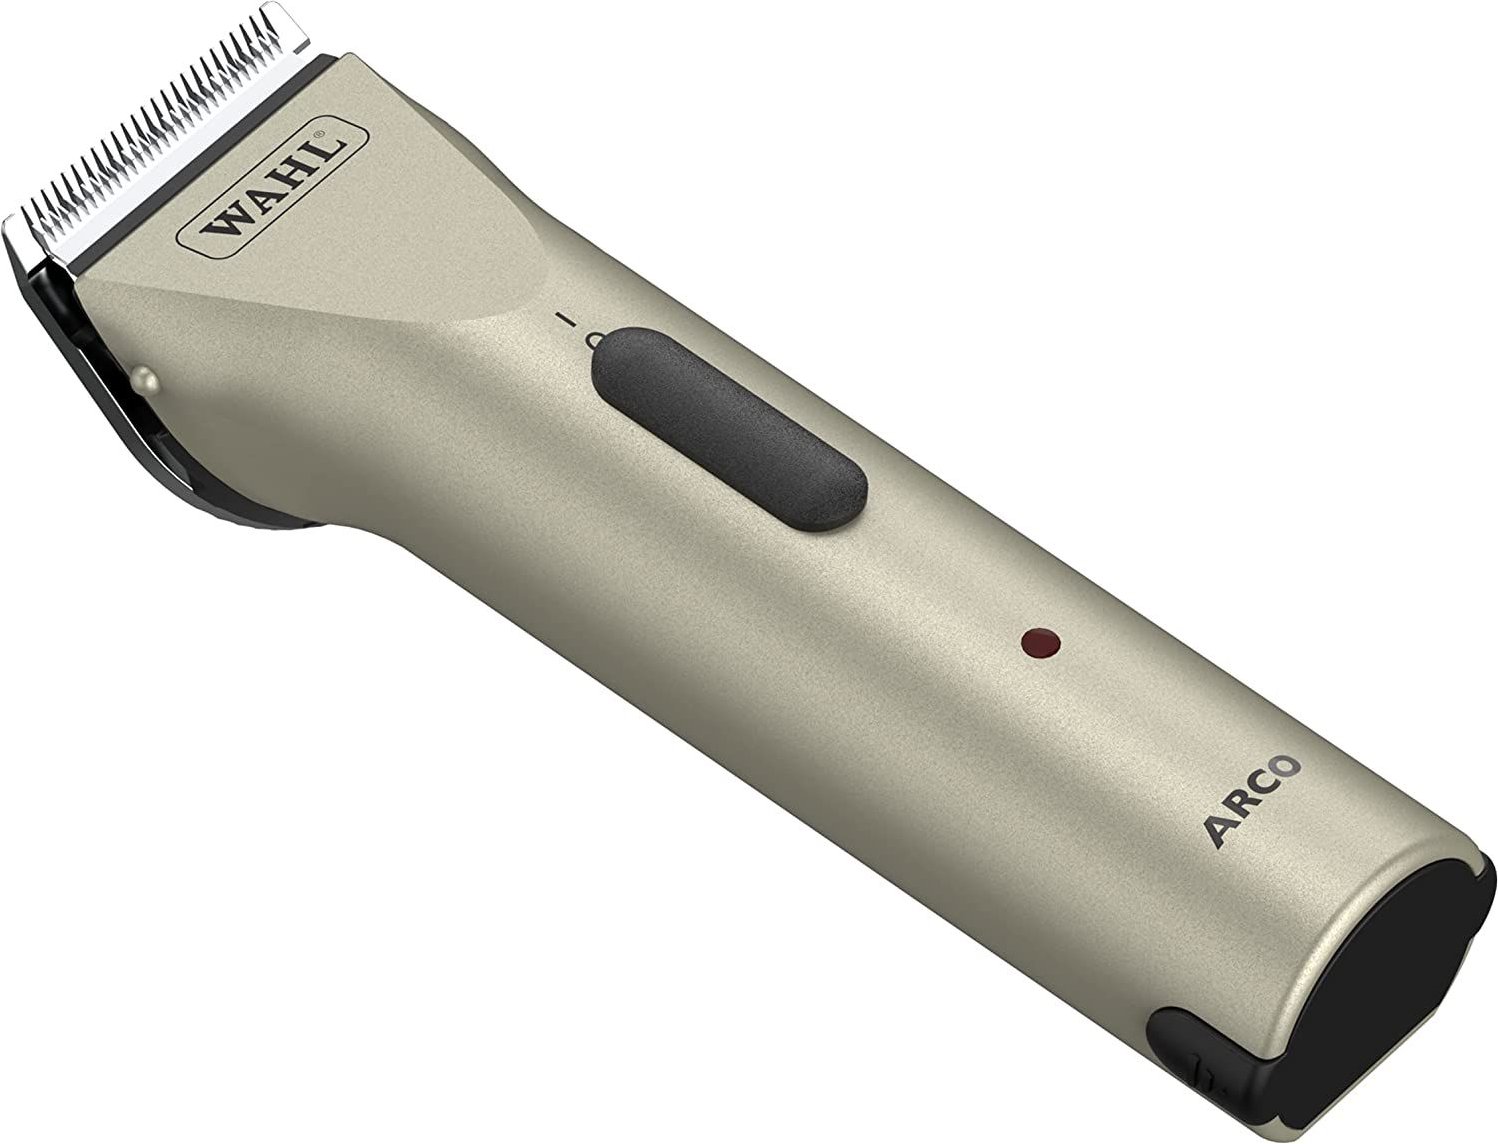 wahl arco cordless